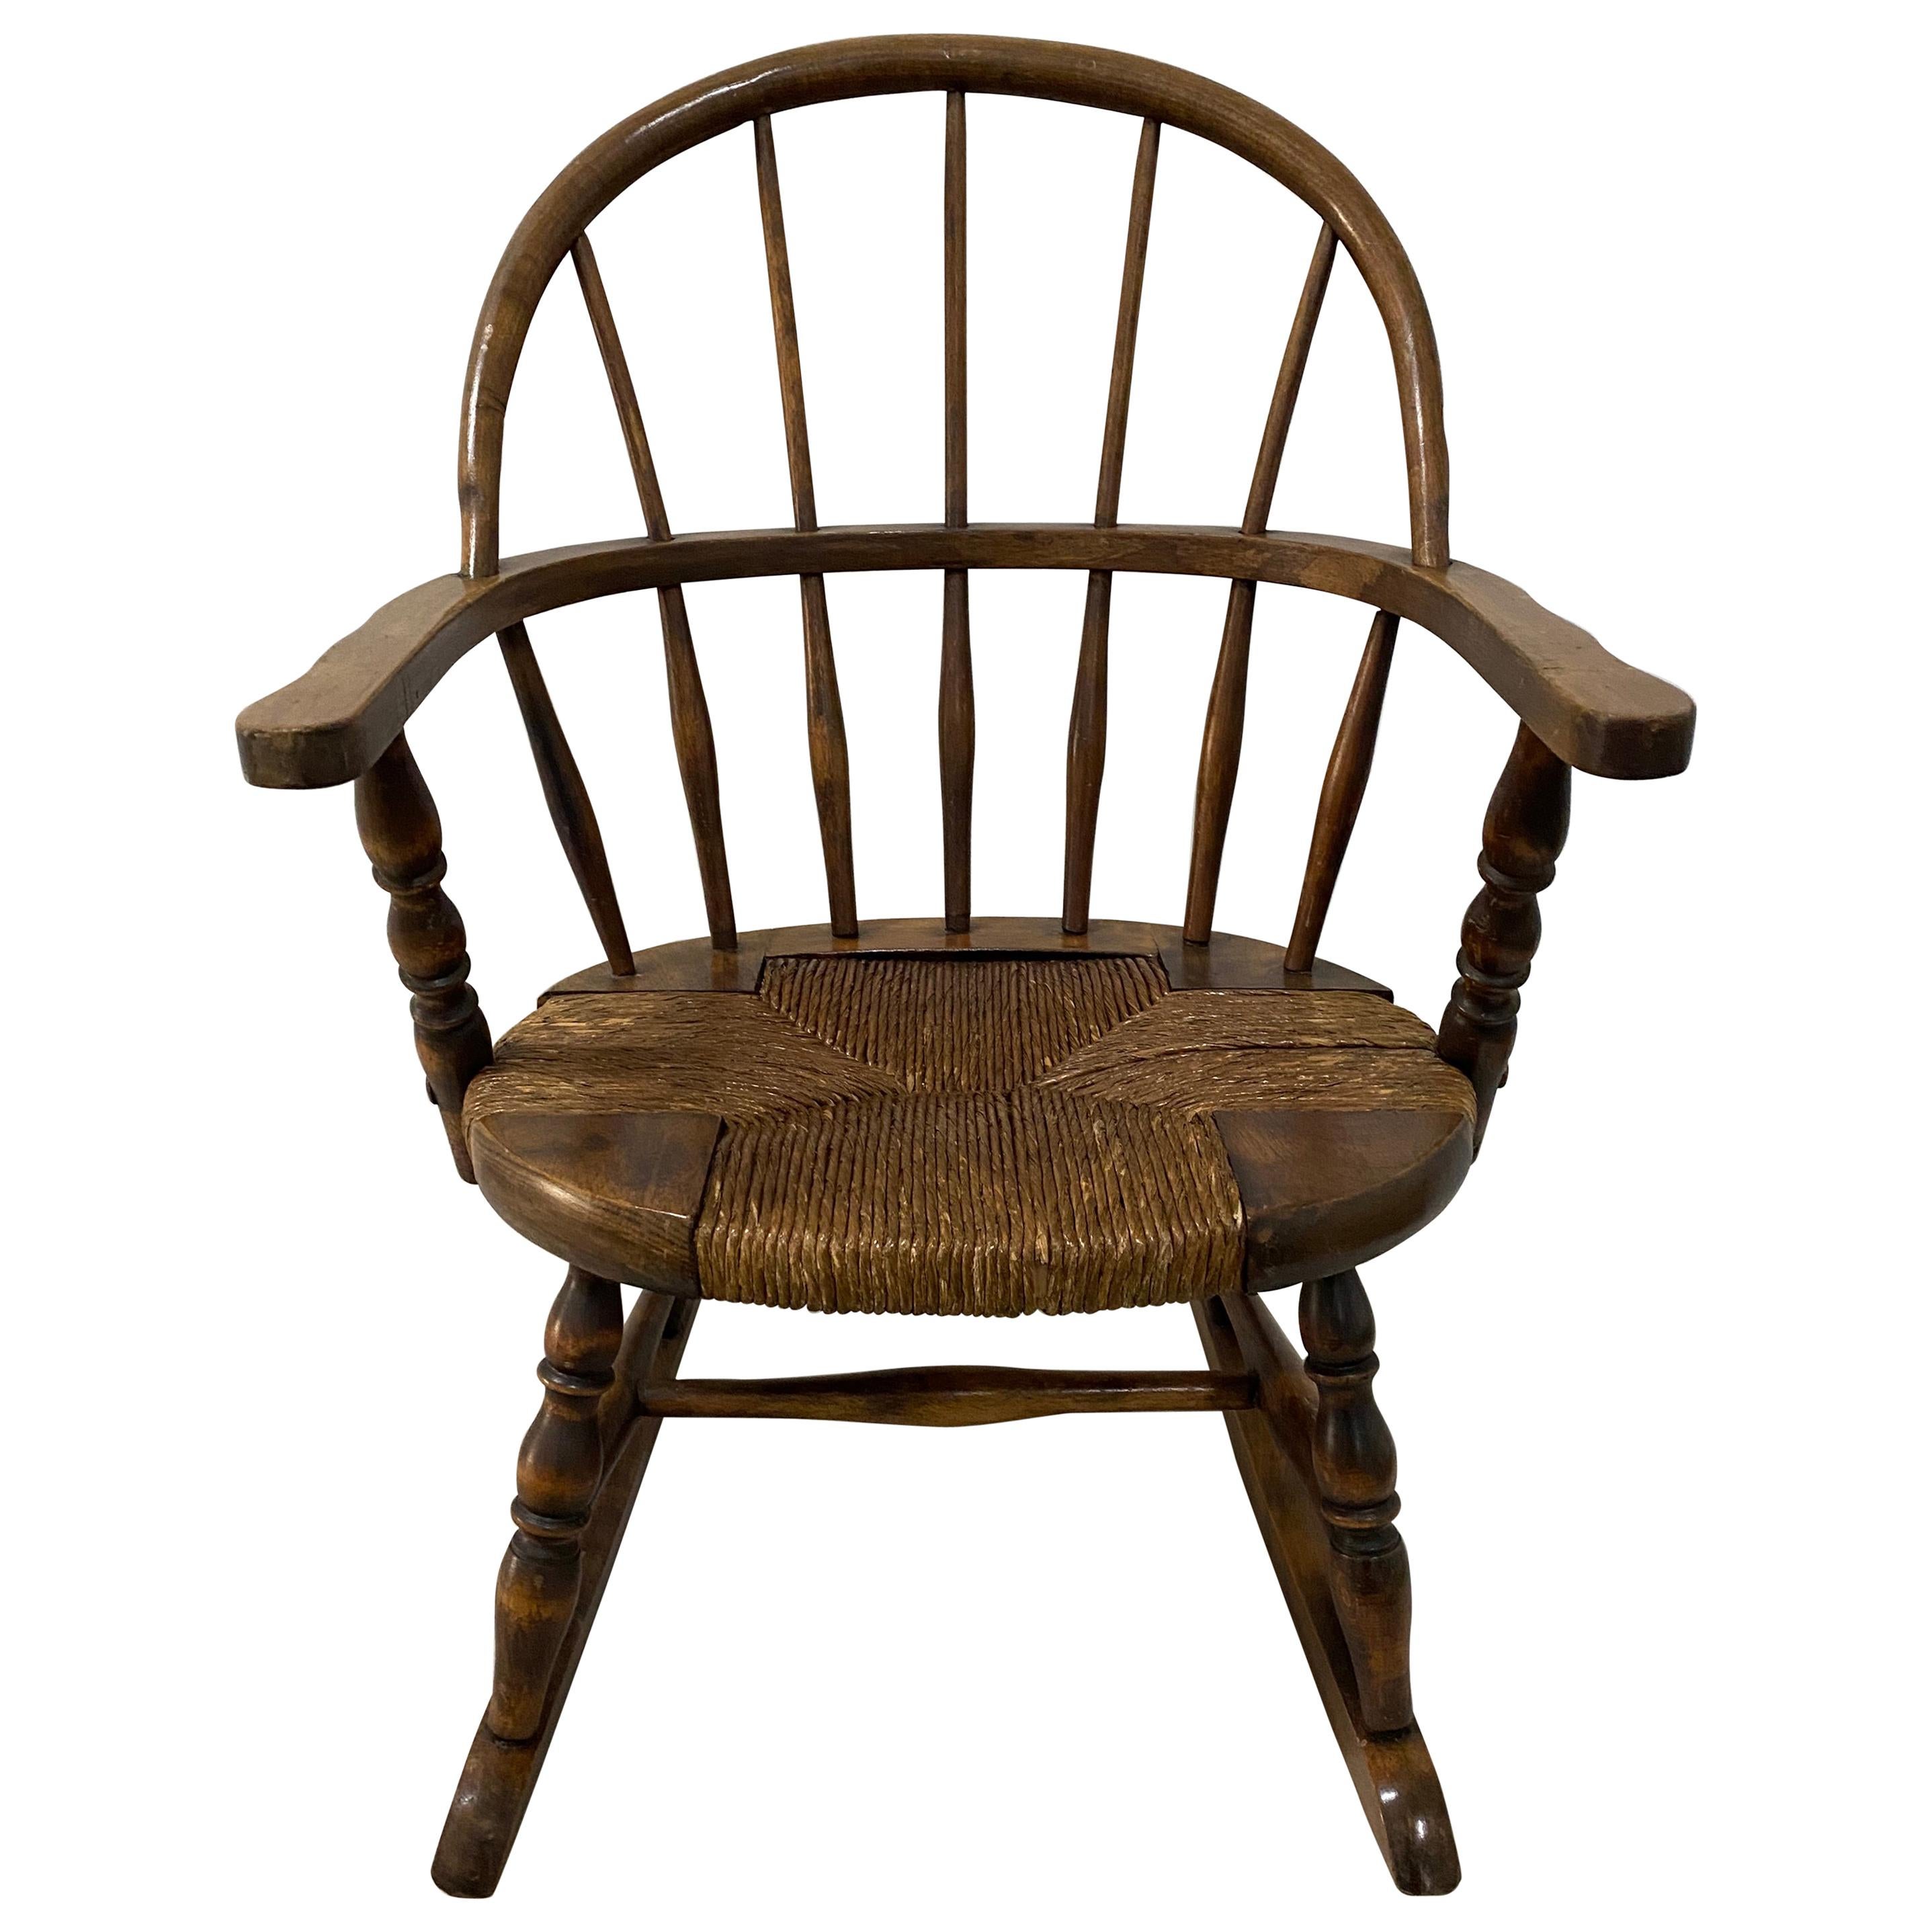 Late 19th Century Child's Windsor Rocking Chair